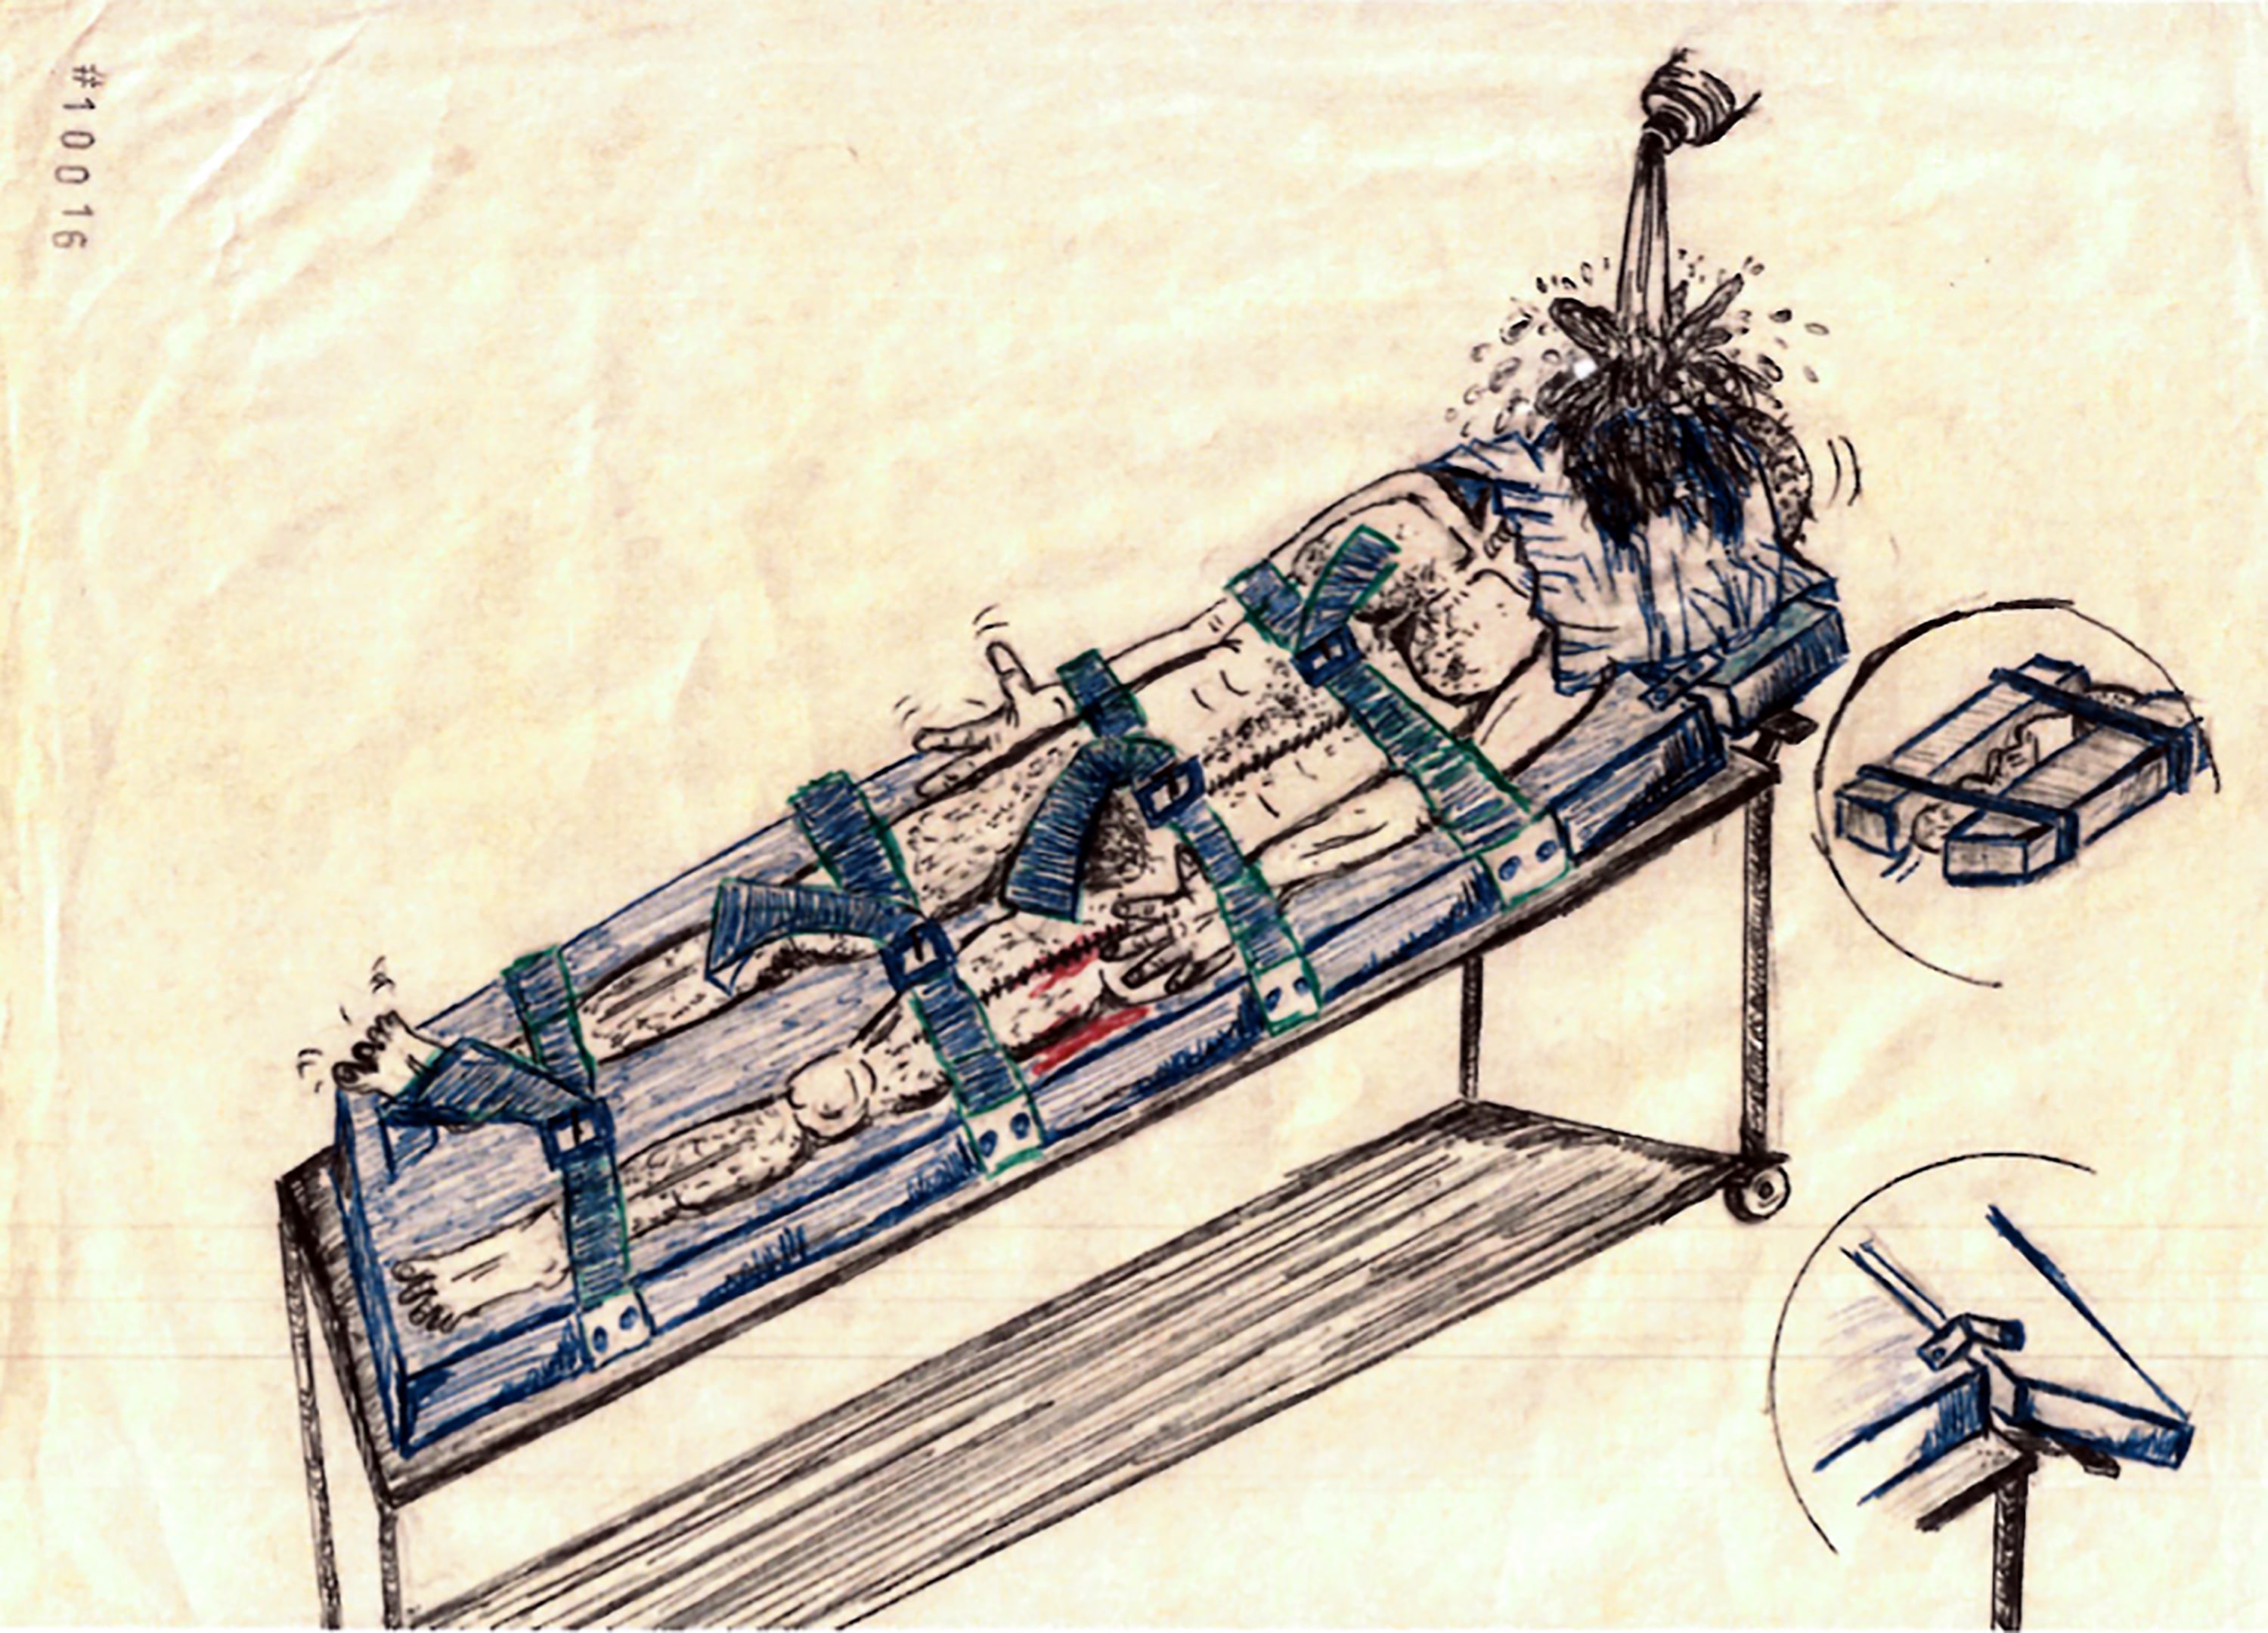 Waterboarding, Walling, Sleep Deprivation Prisoner’s Sketches Show CIA